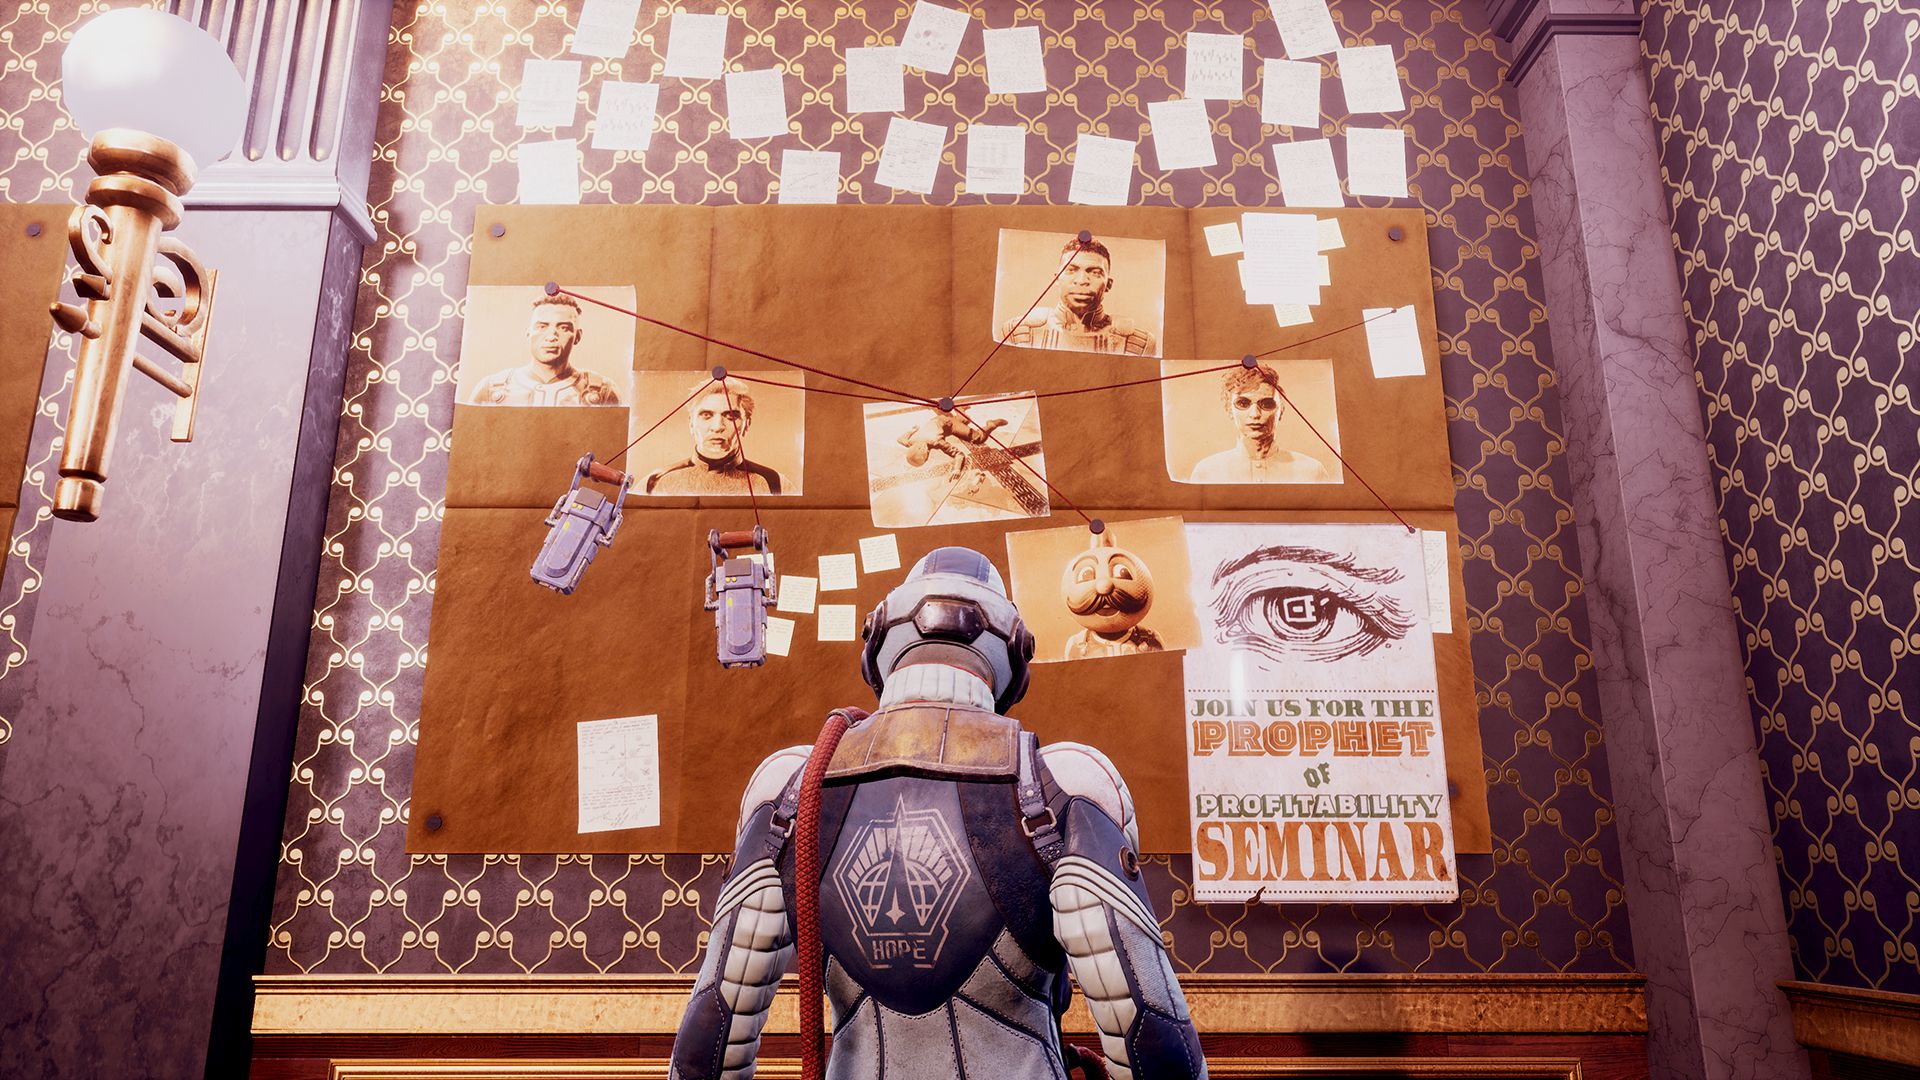 SummaryThe Outer Worlds: Murder on Eridanos is out nowThis is the second and final story-based expansion for The Outer WorldsIn this DLC, solve the Halcyon colony’s grandest murder mystery! The second and final story-driven expansion for The Outer Worlds is now available! For those who want to do more in the Halcyon colony, travel to Eridanos can now commence. Don’t expect a peaceful vacation, though! The iconic aetherwave actor, Halcyon Helen, star of “Terror On Monarch,” and the spokesperson for Rizzo’s new refreshing Spectrum Brown Vodka (coming soon to stores, bars, and vending machines near you... ask your local Rizzo’s representative for more details!) is dead! It’s up to you and your crew, along with the trusty Discrepancy Amplifier, to get to the bottom of the case. Approach the case however you’d like and narrow down the suspect list from the likes of famous tossball player, Black Hole Bertie, or the “Terror on Monarch” leading actor, Spencer Woolrich. Perhaps it was even Helen’s automechanical co-star, Burbage-3001! Make use of your complimentary room at the Grand Colonial Hotel to set up your own investigation headquarters. You find the motive, you accuse the criminal. Per your unbridled interest in the Halcyon colony, you are reminded that it is your duty to fulfill this obligation on Eridanos. Don’t worry as the Board has graciously supplied three additional scientific weapons to discover, additional armor sets, granted three additional levels to the current level cap and plenty of support staff to make your journey more enjoyable amicable functional. These tools will be critical to your success as you will come across a variety of hostile indigenous life as well as potential unruly ex-employees. At your disposal, you will also have the Discrepancy Amplifier. This miraculous scientific marvel allows you to reveal hidden anomalies or abnormalities, and each discovery may be one step closer in determining the culprit.   As mandated by policy, every employee is allowed a very brief rest period. Take a relaxing stroll through Rizzo’s Purpleberry Orchards or kick back at the local bar with a bottle many varieties of Spectrum Vodka (the Board reminds you that lollygagging, tardiness, horseplay, complaining, fraternizing, or any negative impact – both physically and emotionally – to other employees or yourself will result in a dock in your pay). Be sure to also pack some eye protection because due to the positioning of Eridanos in the upper stratosphere of the gas giant and perpetual motion of the station, it is always sunny. Lastly, research shows that employee productivity increases by 86.5% when accompanied by musical numbers, so the Board has created the following jingle for all employees to memorize enjoy. We had a blast creating this rhythmic introduction to this fantastic expansion and recommend checking it out to see (and sing along) to all Murder on Eridanos has to offer. https://youtu.be/CAAi3Q_eQaE In case you missed it, the first expansion, The Outer Worlds: Peril on Gorgon, is also available independently for $14.99 or through The Outer Worlds Expansion Pass with the second expansion for extra savings at the price of $24.99. Xbox Game Pass owners will be able to get Murder on Eridanos or The Outer Worlds Expansion Pass at a 10% discount. So be sure to join us, remember the Board requires requests you to do so, as The Outer Worlds: Murder on Eridanos launches today, March 17, for $14.99 USD.